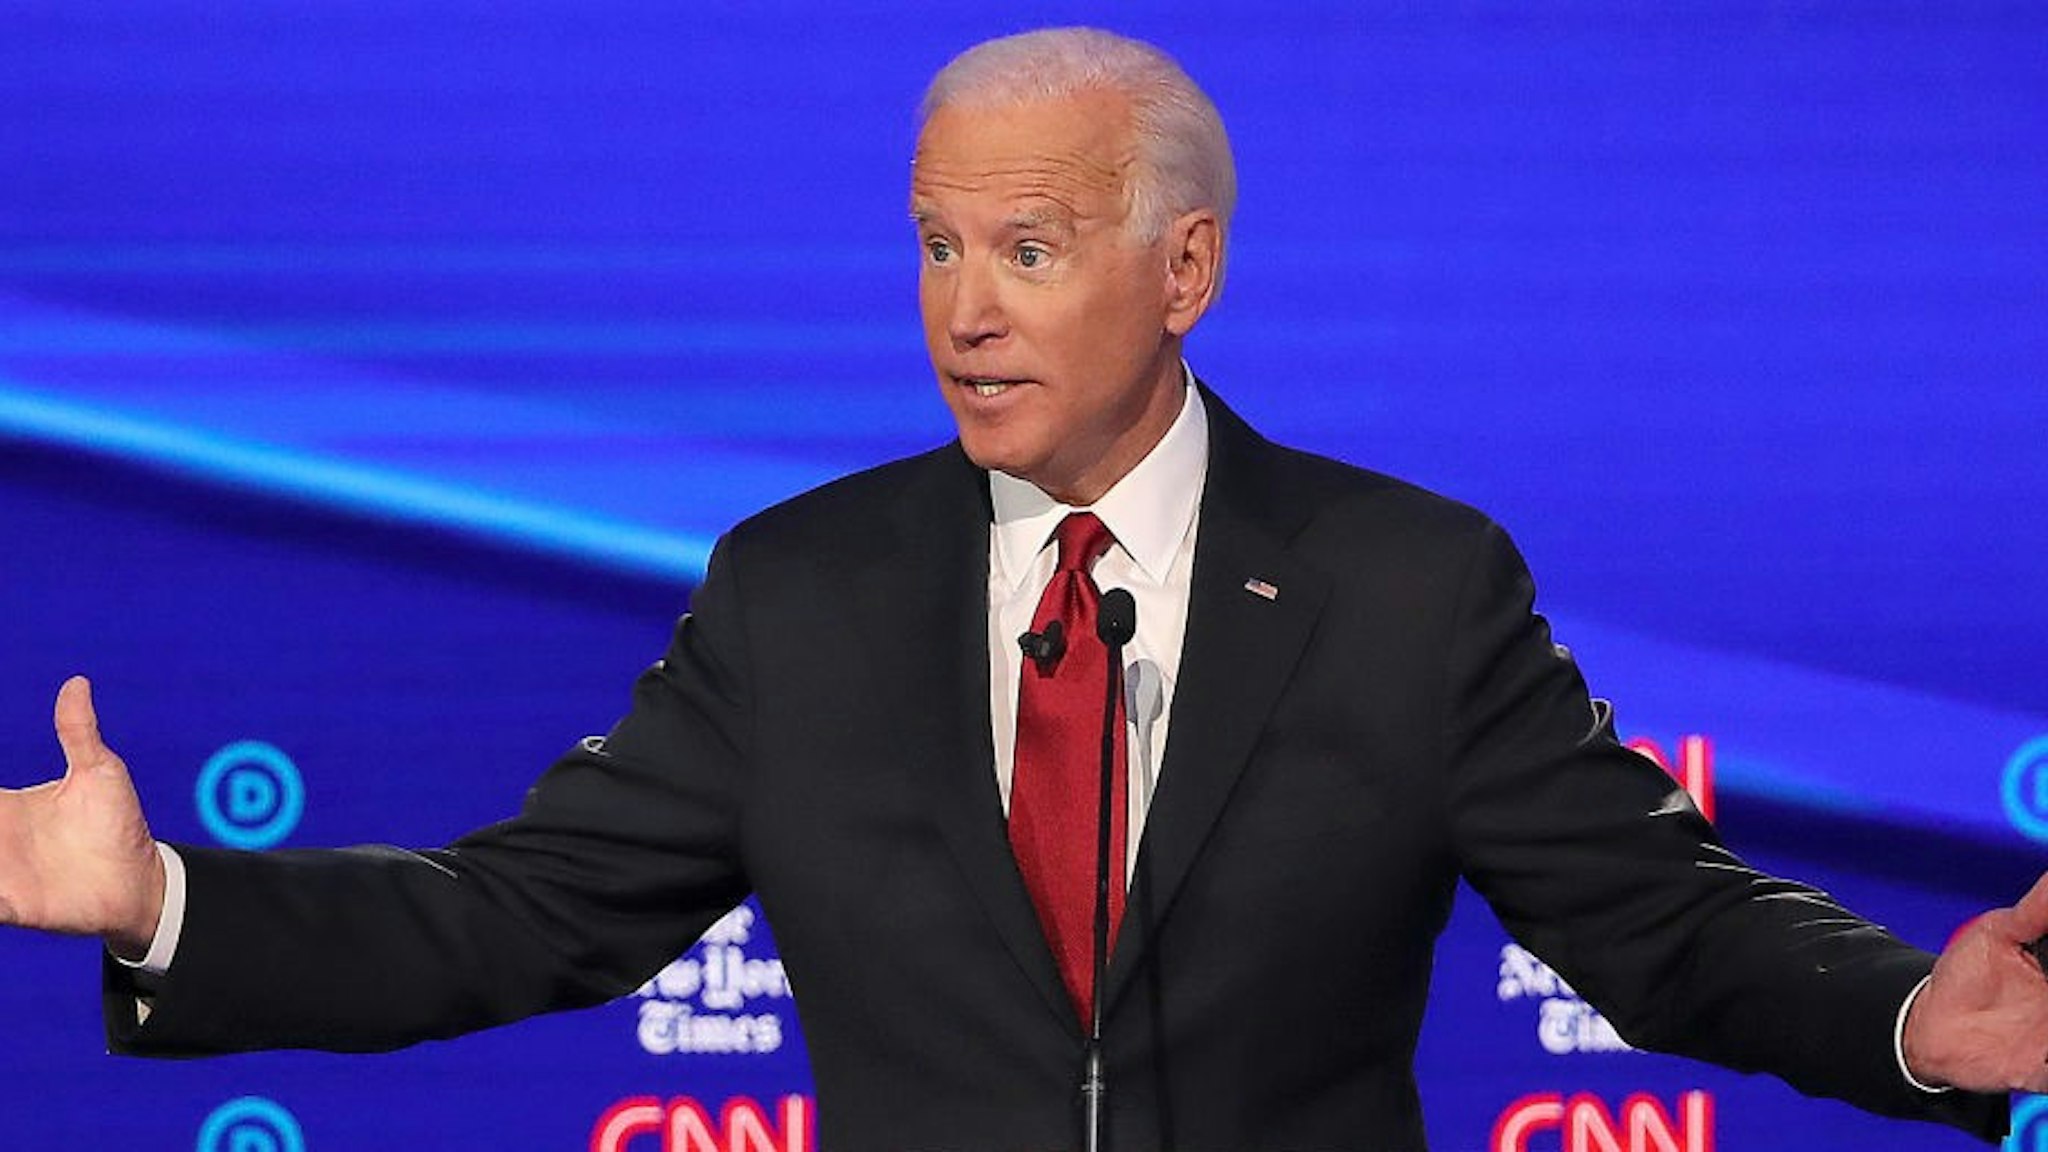 Former Vice President Joe Biden speaks during the Democratic Presidential Debate at Otterbein University on October 15, 2019 in Westerville, Ohio. A record 12 presidential hopefuls are participating in the debate hosted by CNN and The New York Times. (Photo by Win McNamee/Getty Images)